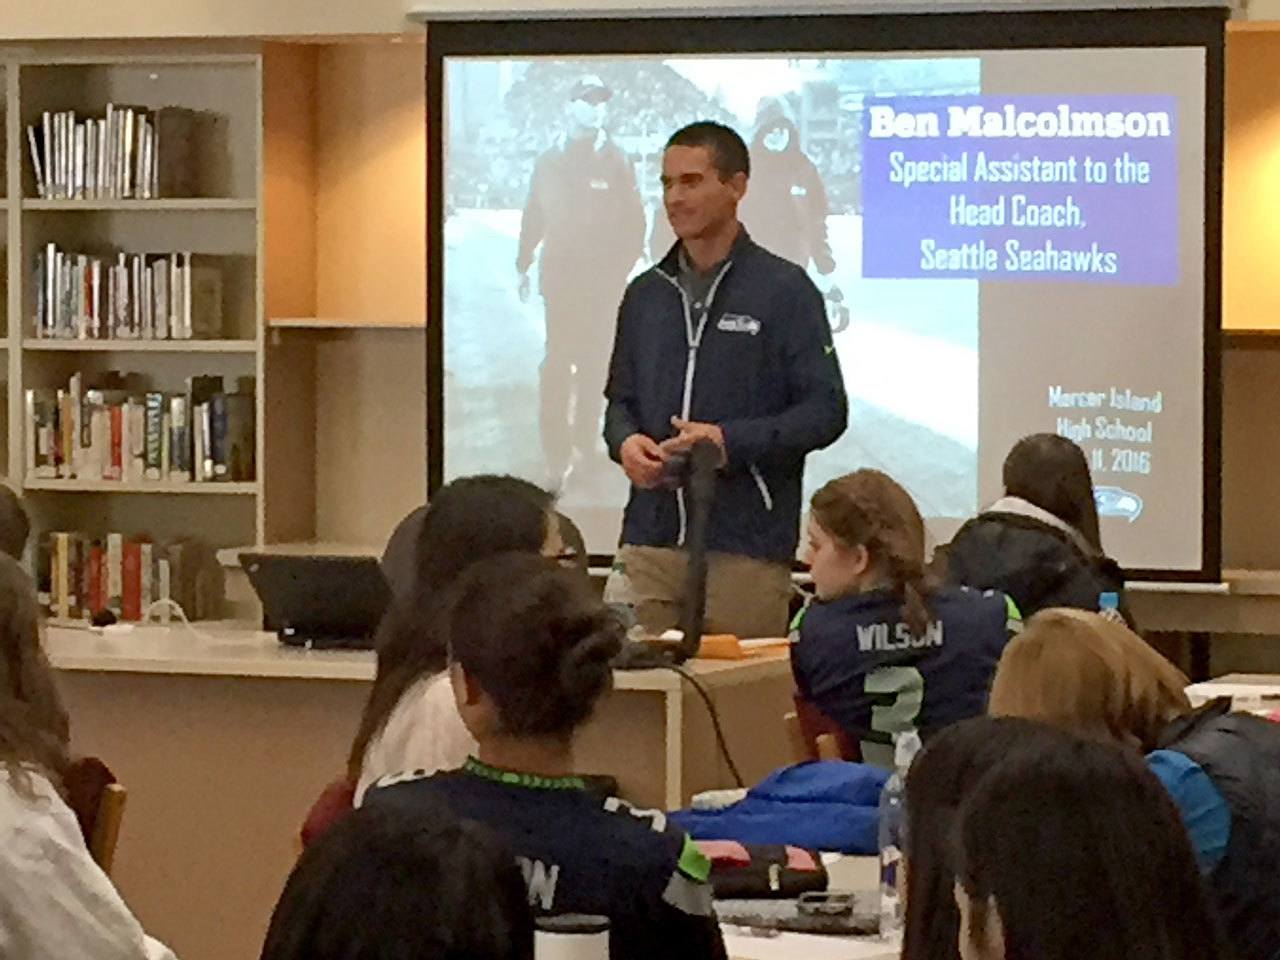 Ben Malcolmson, special assistant to Seattle Seahawks head coach Pete Carroll, speaks to Mercer Island High School students about reaching their potential. Photo courtesy of Craig Degginger/Mercer Island School District